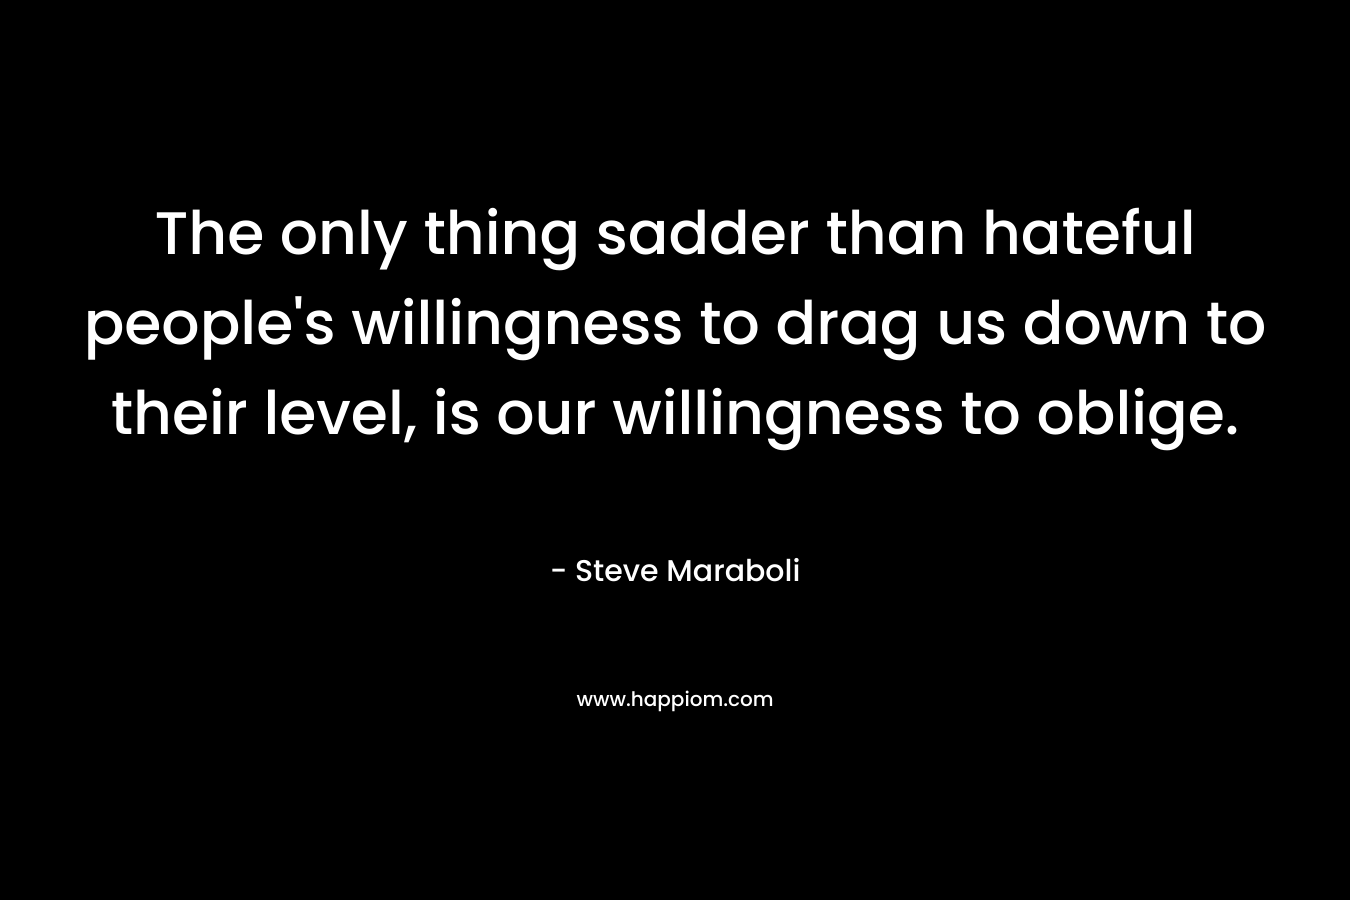 The only thing sadder than hateful people's willingness to drag us down to their level, is our willingness to oblige.